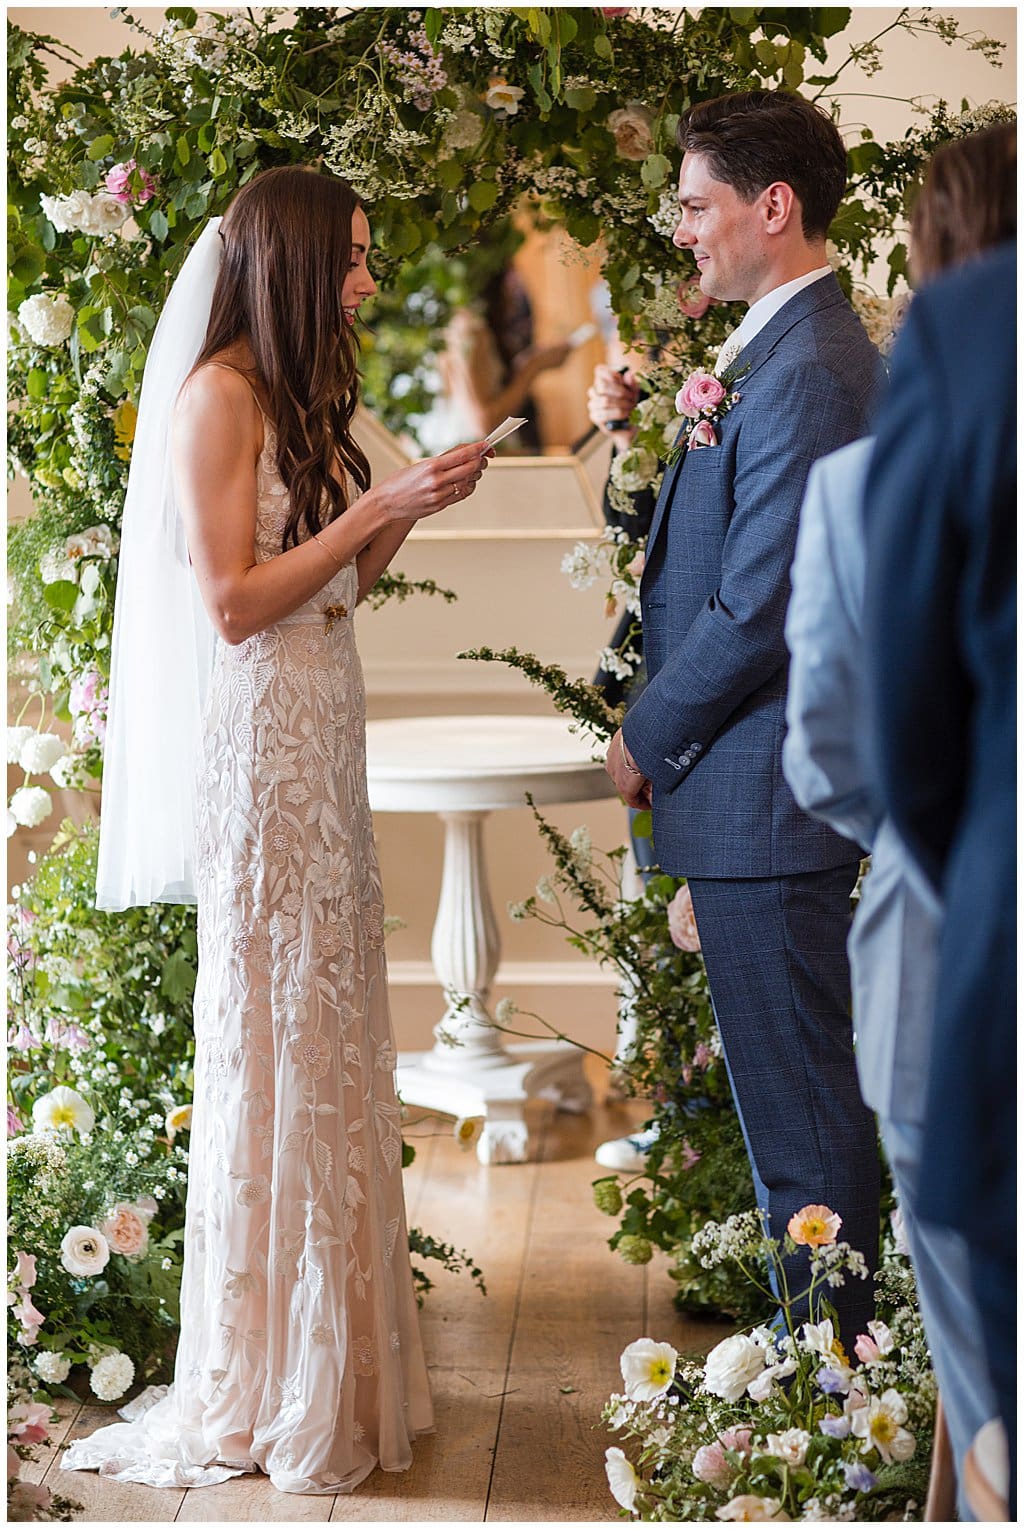 Bride reading personal vows to her Groom in front of a flower archway